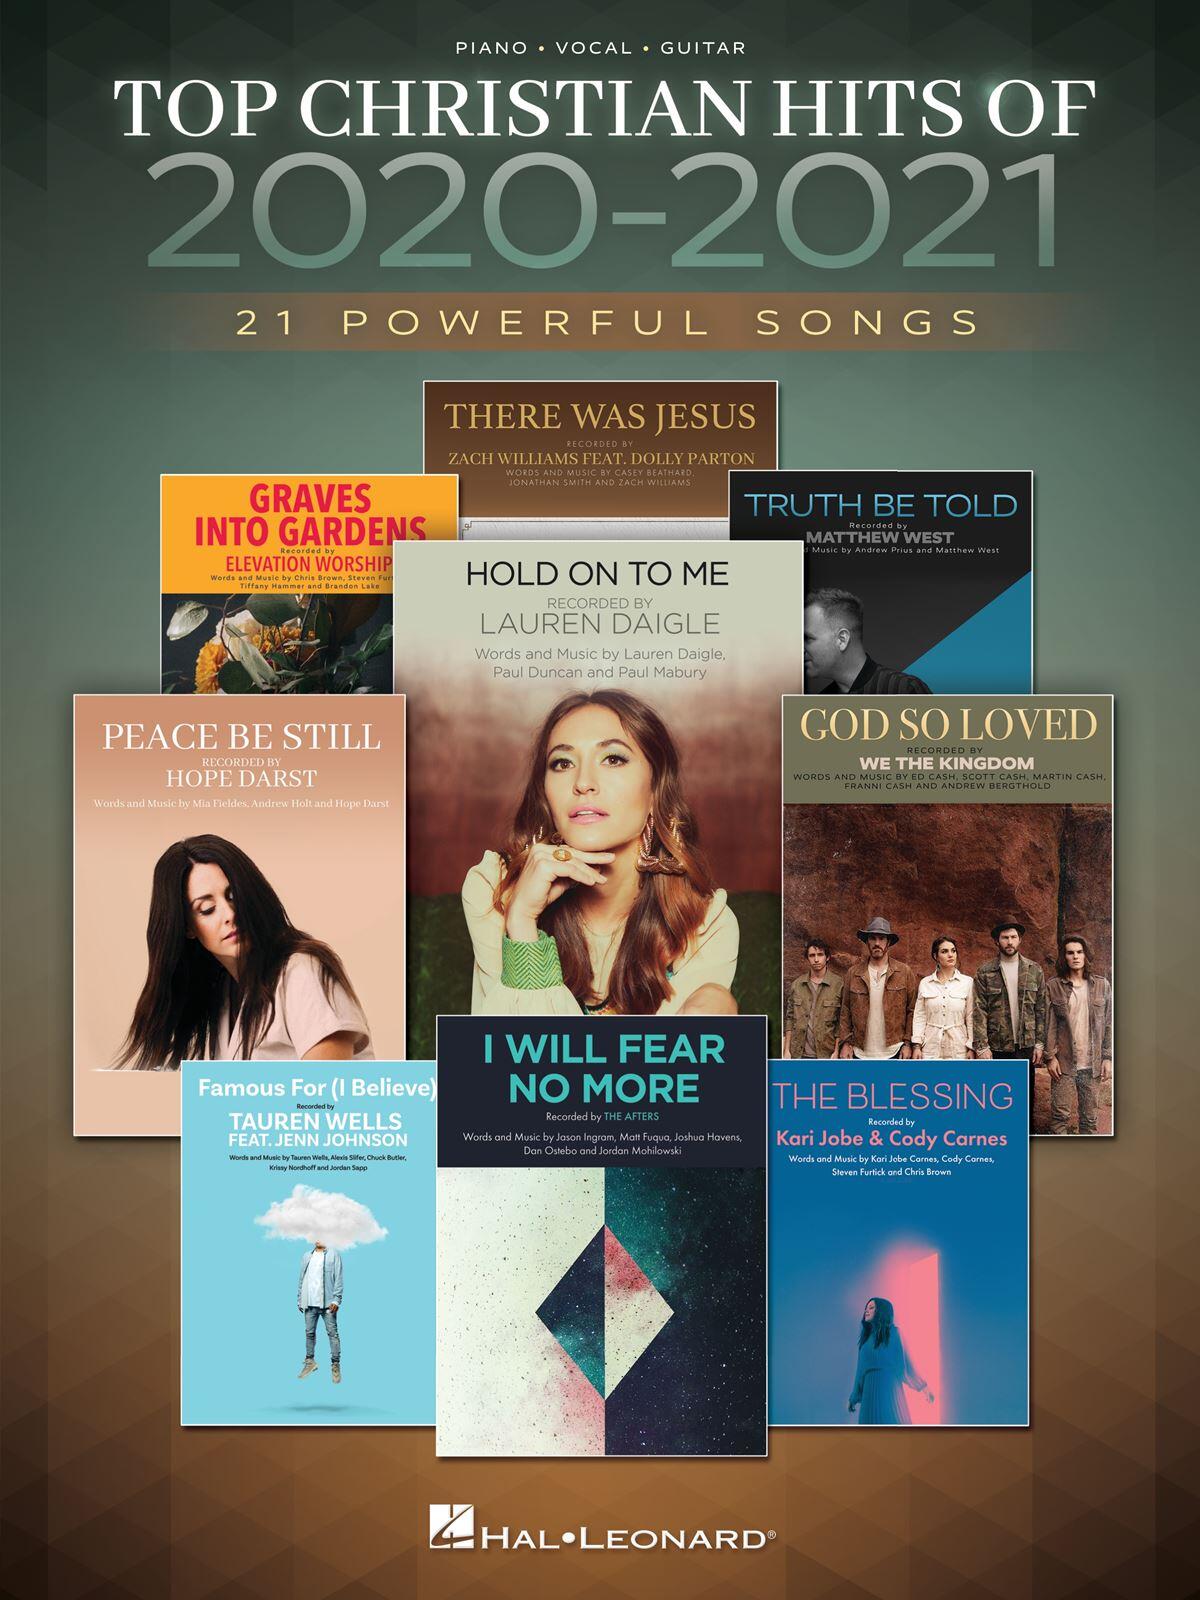 Top Christian Hits of 2020-2021 : photo 1